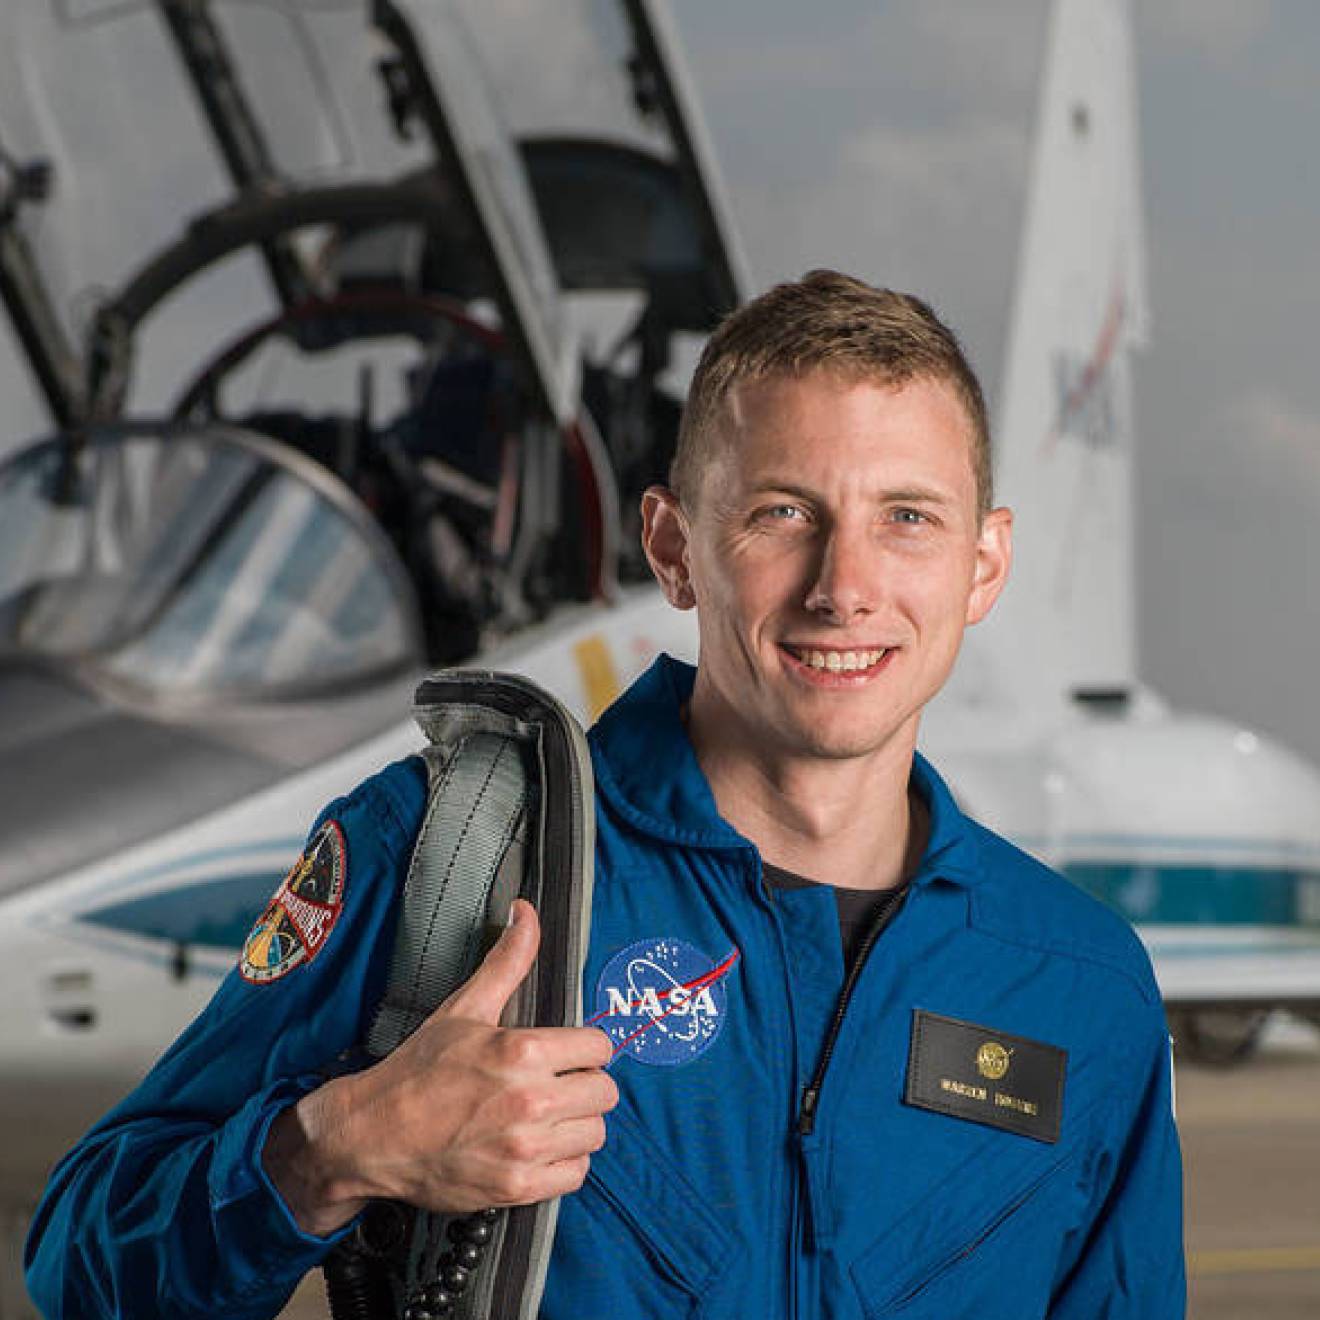 Warren Hoburg in blue spacesuit in front of an aircraft